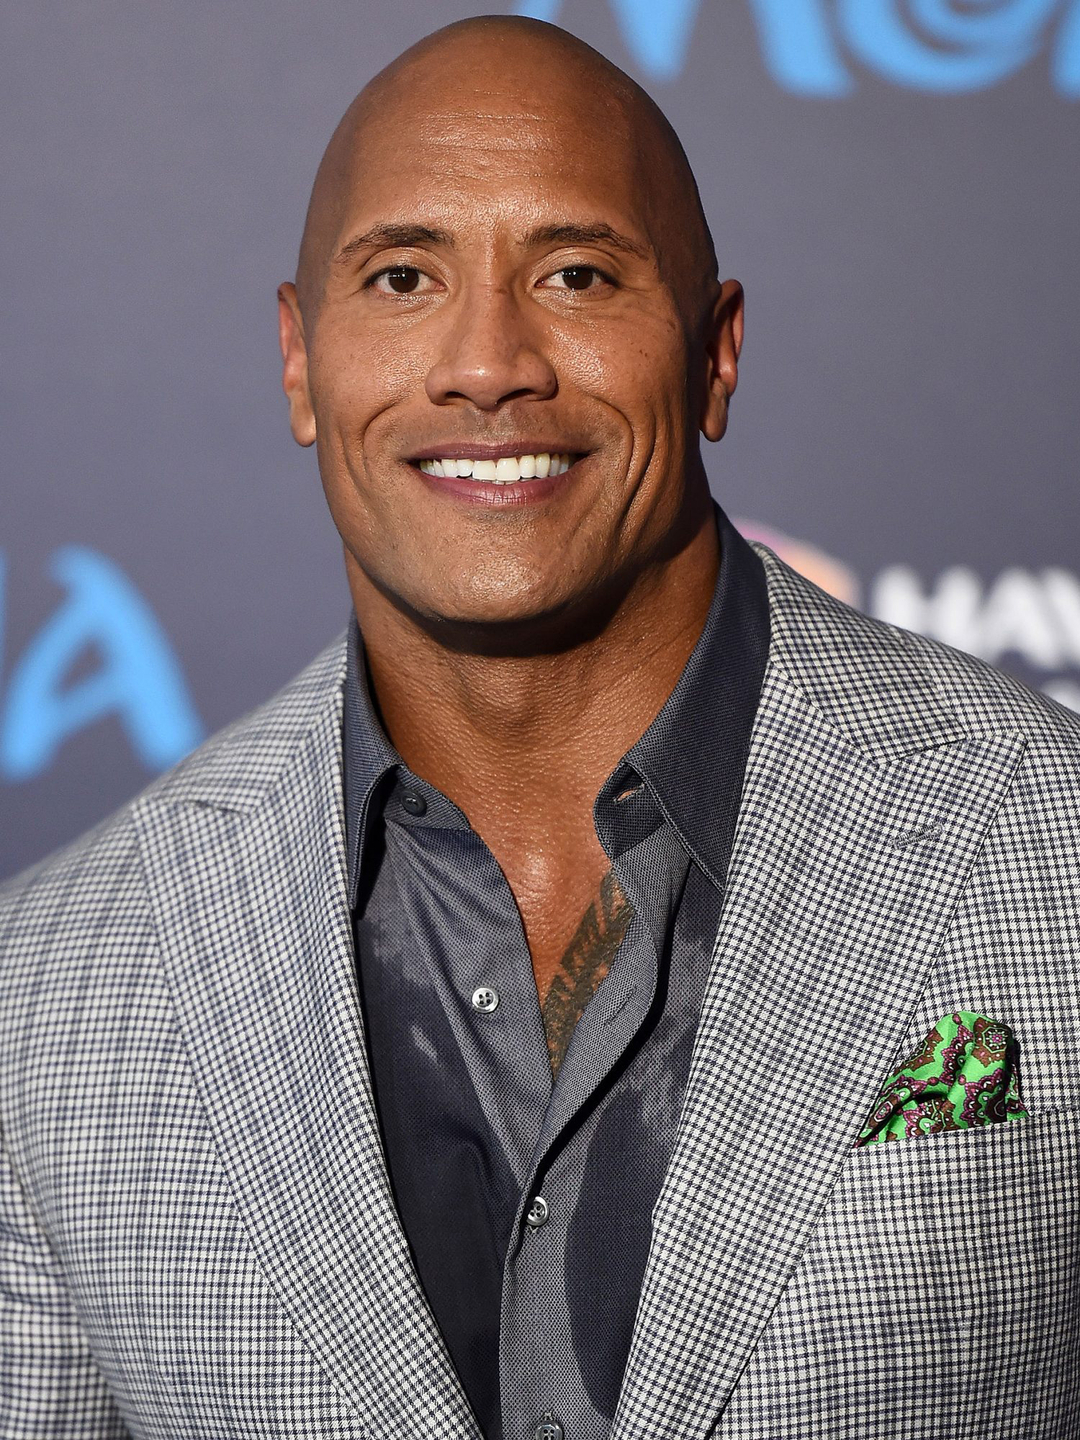 Dwayne Johnson how old is he